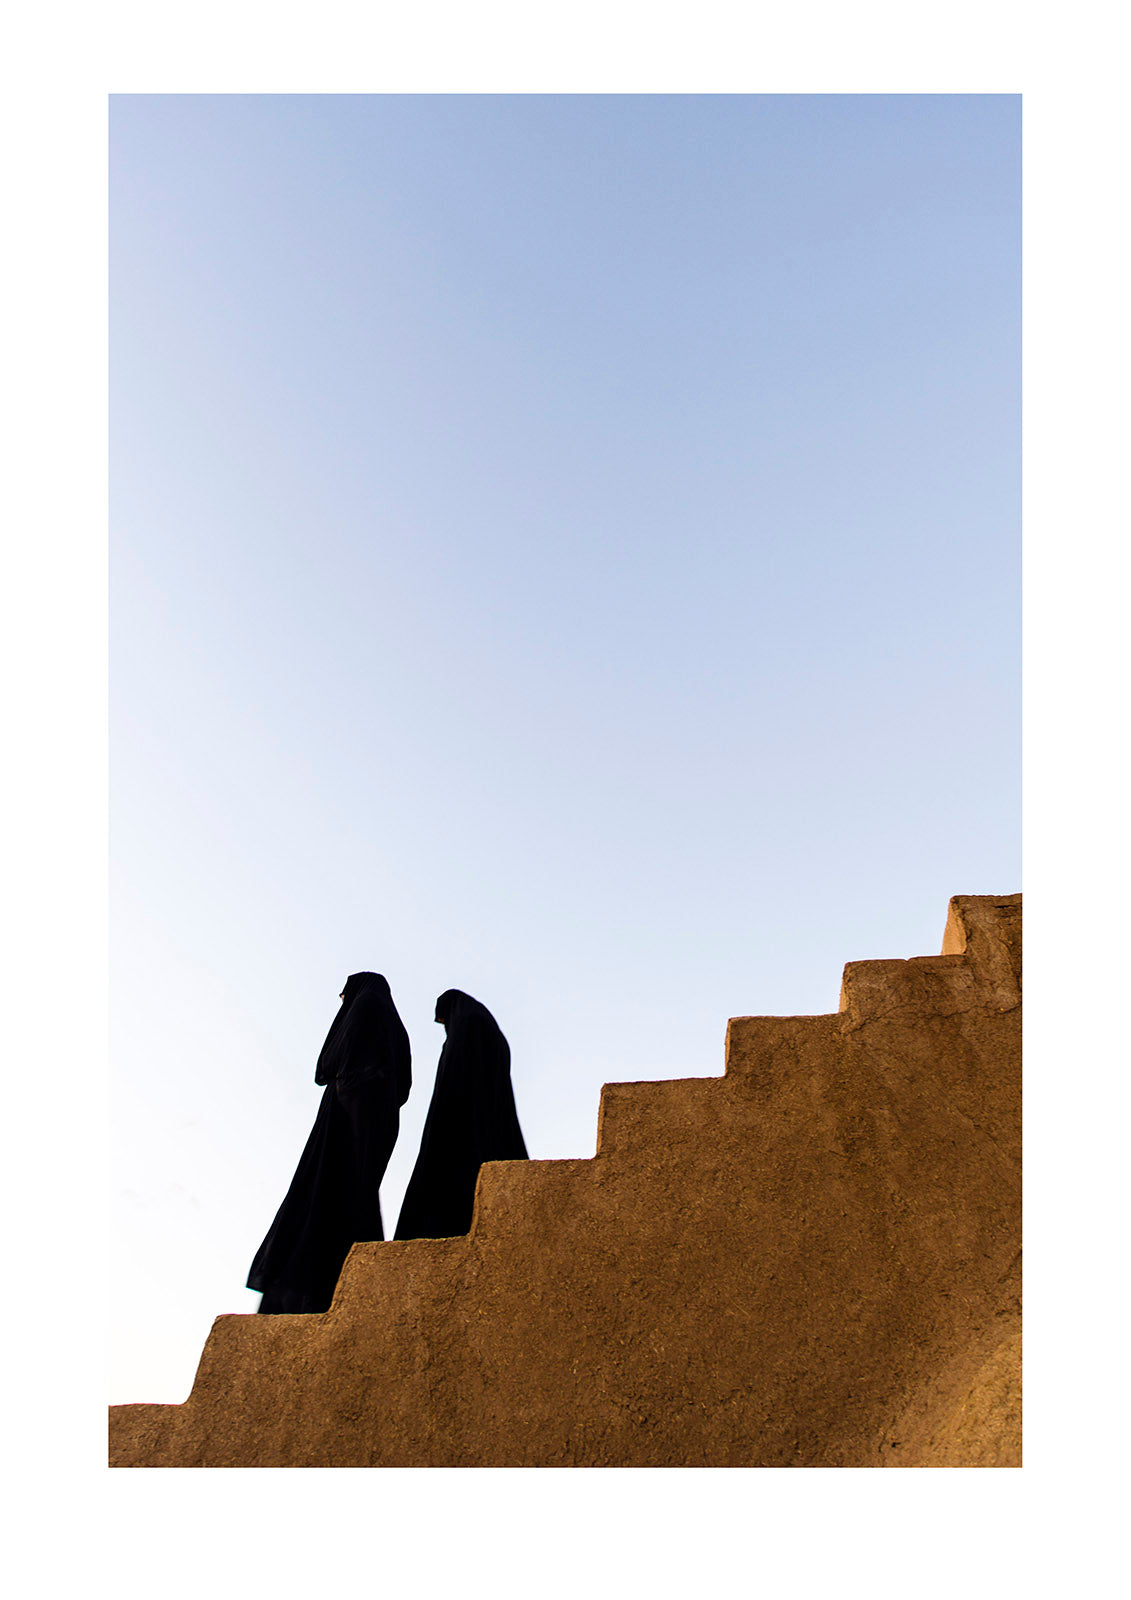 Women dressed in chador descend the stairs of an ancient fortress. Narin Castle, Meybod, Meybod County, Yazd Province, Islamic Republic of Iran.